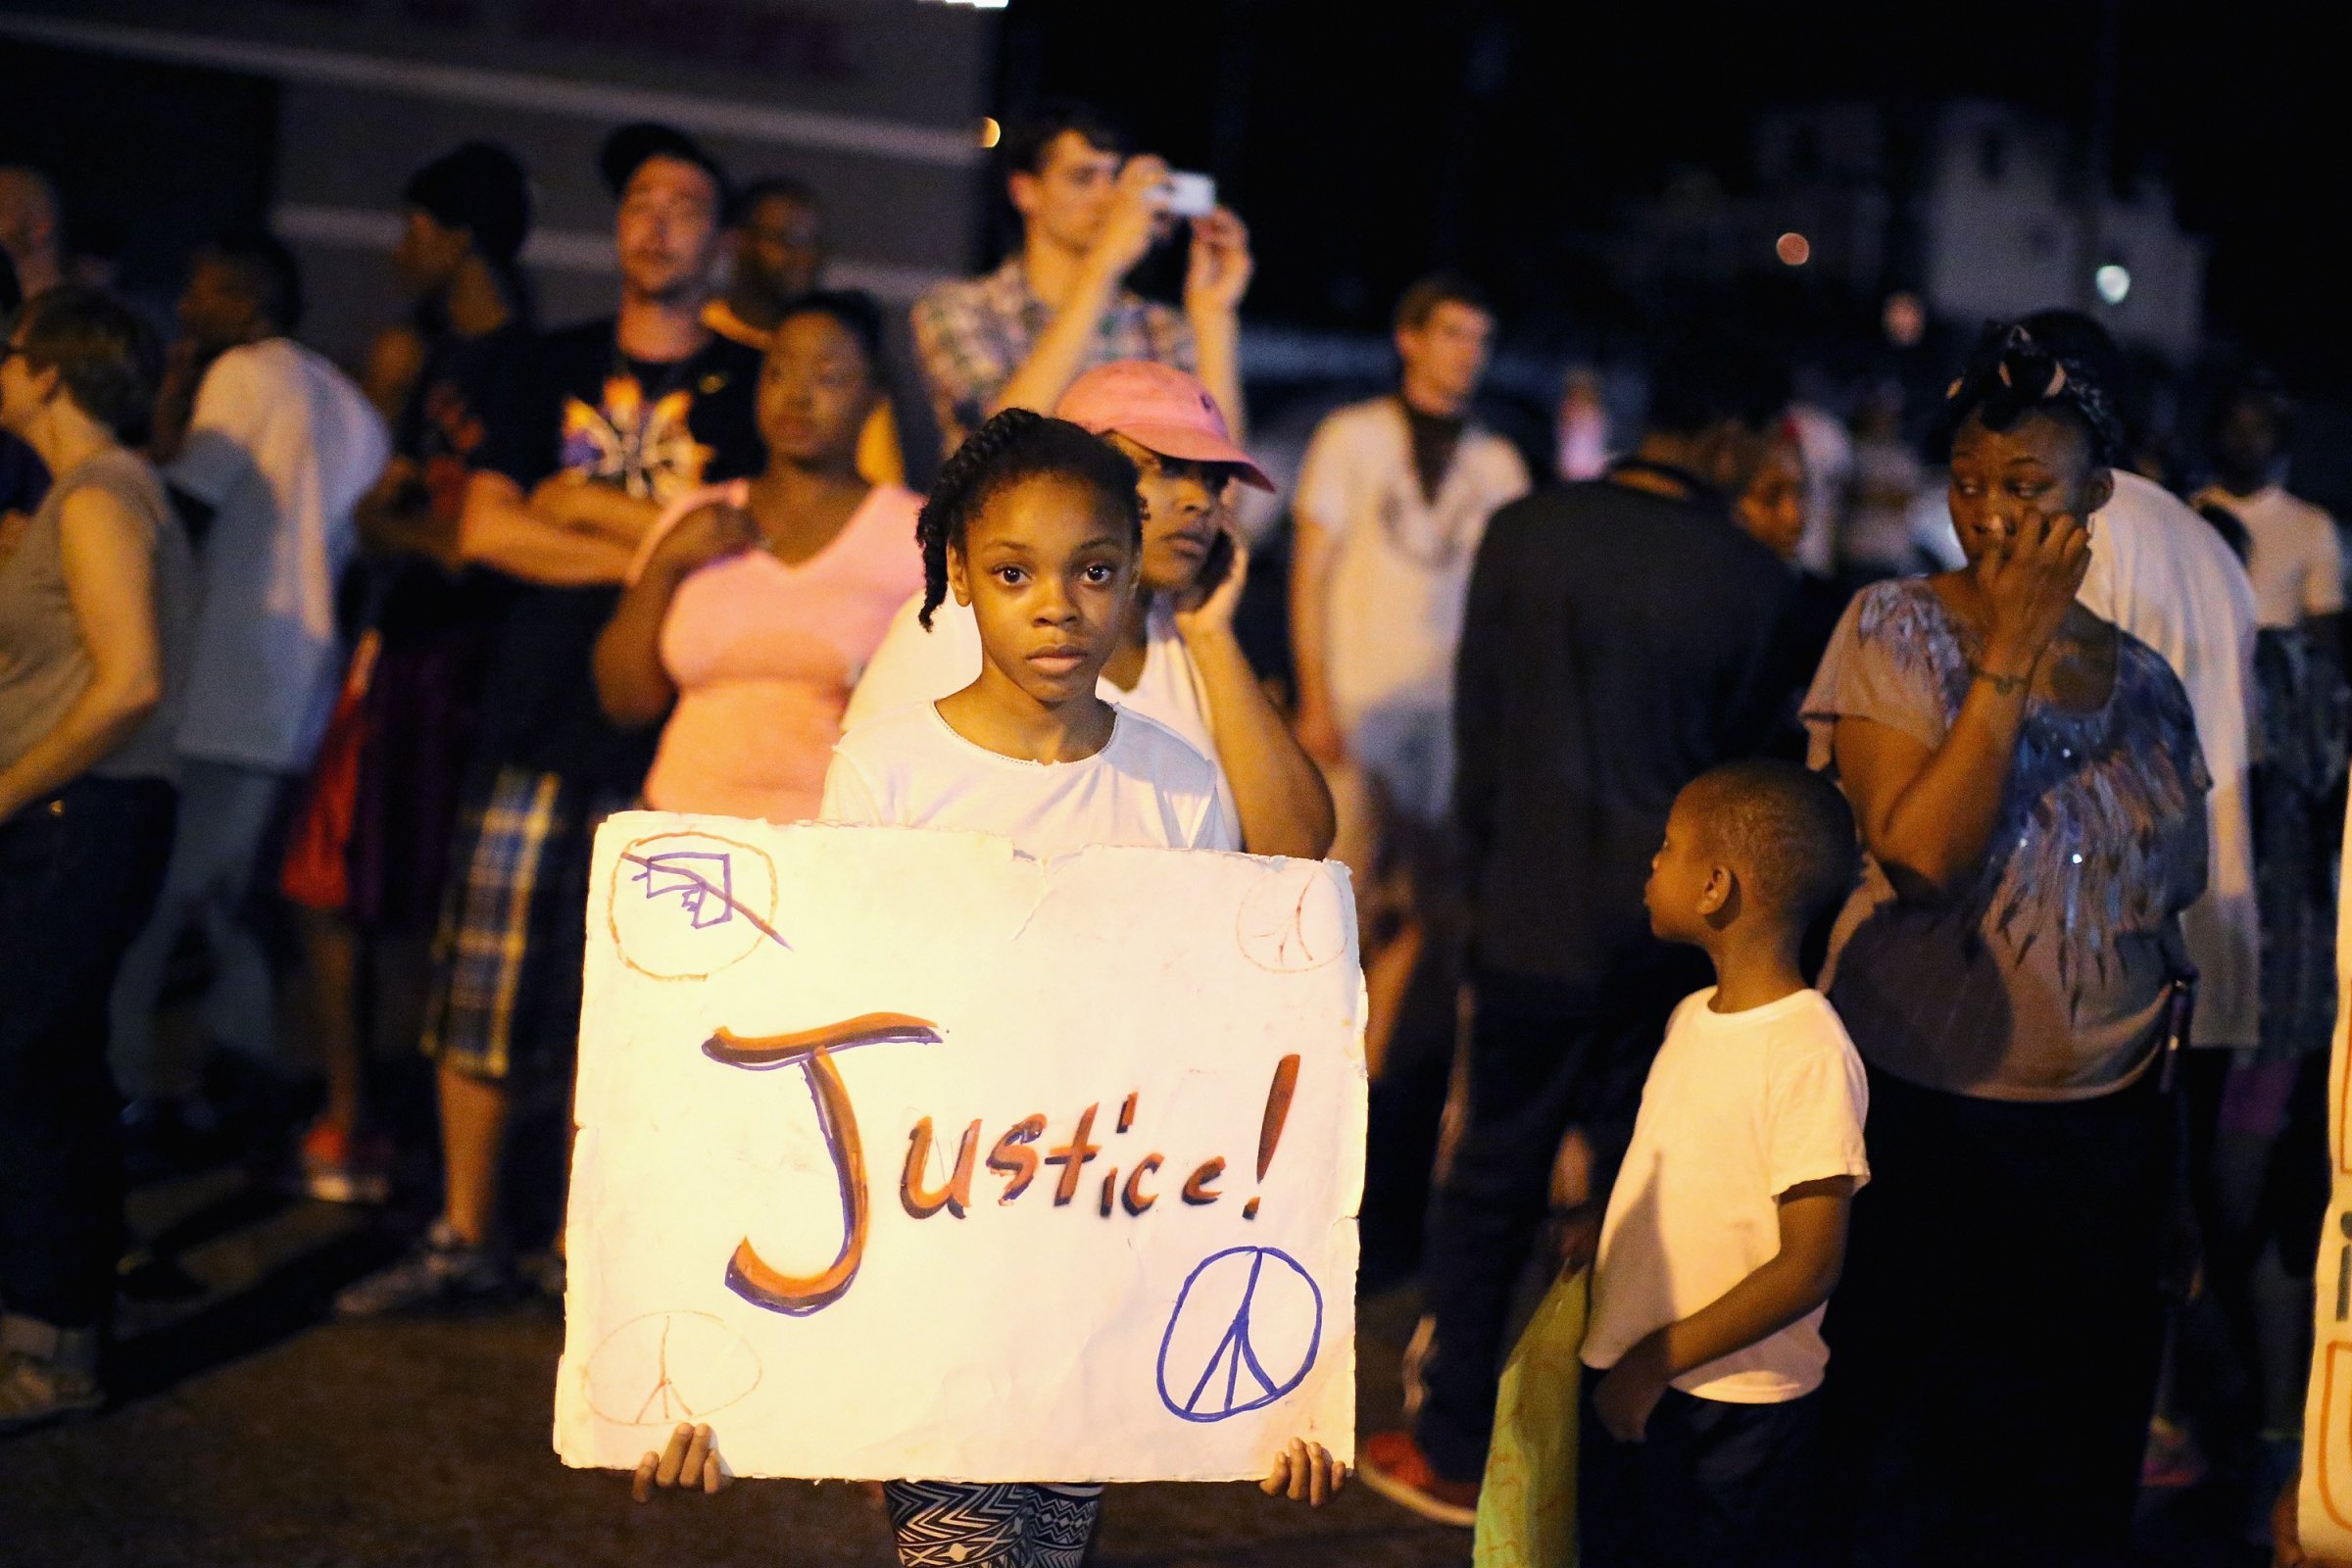 Ferguson Community Continues To Demonstrate Over Police Shooting Death Of Michael Brown